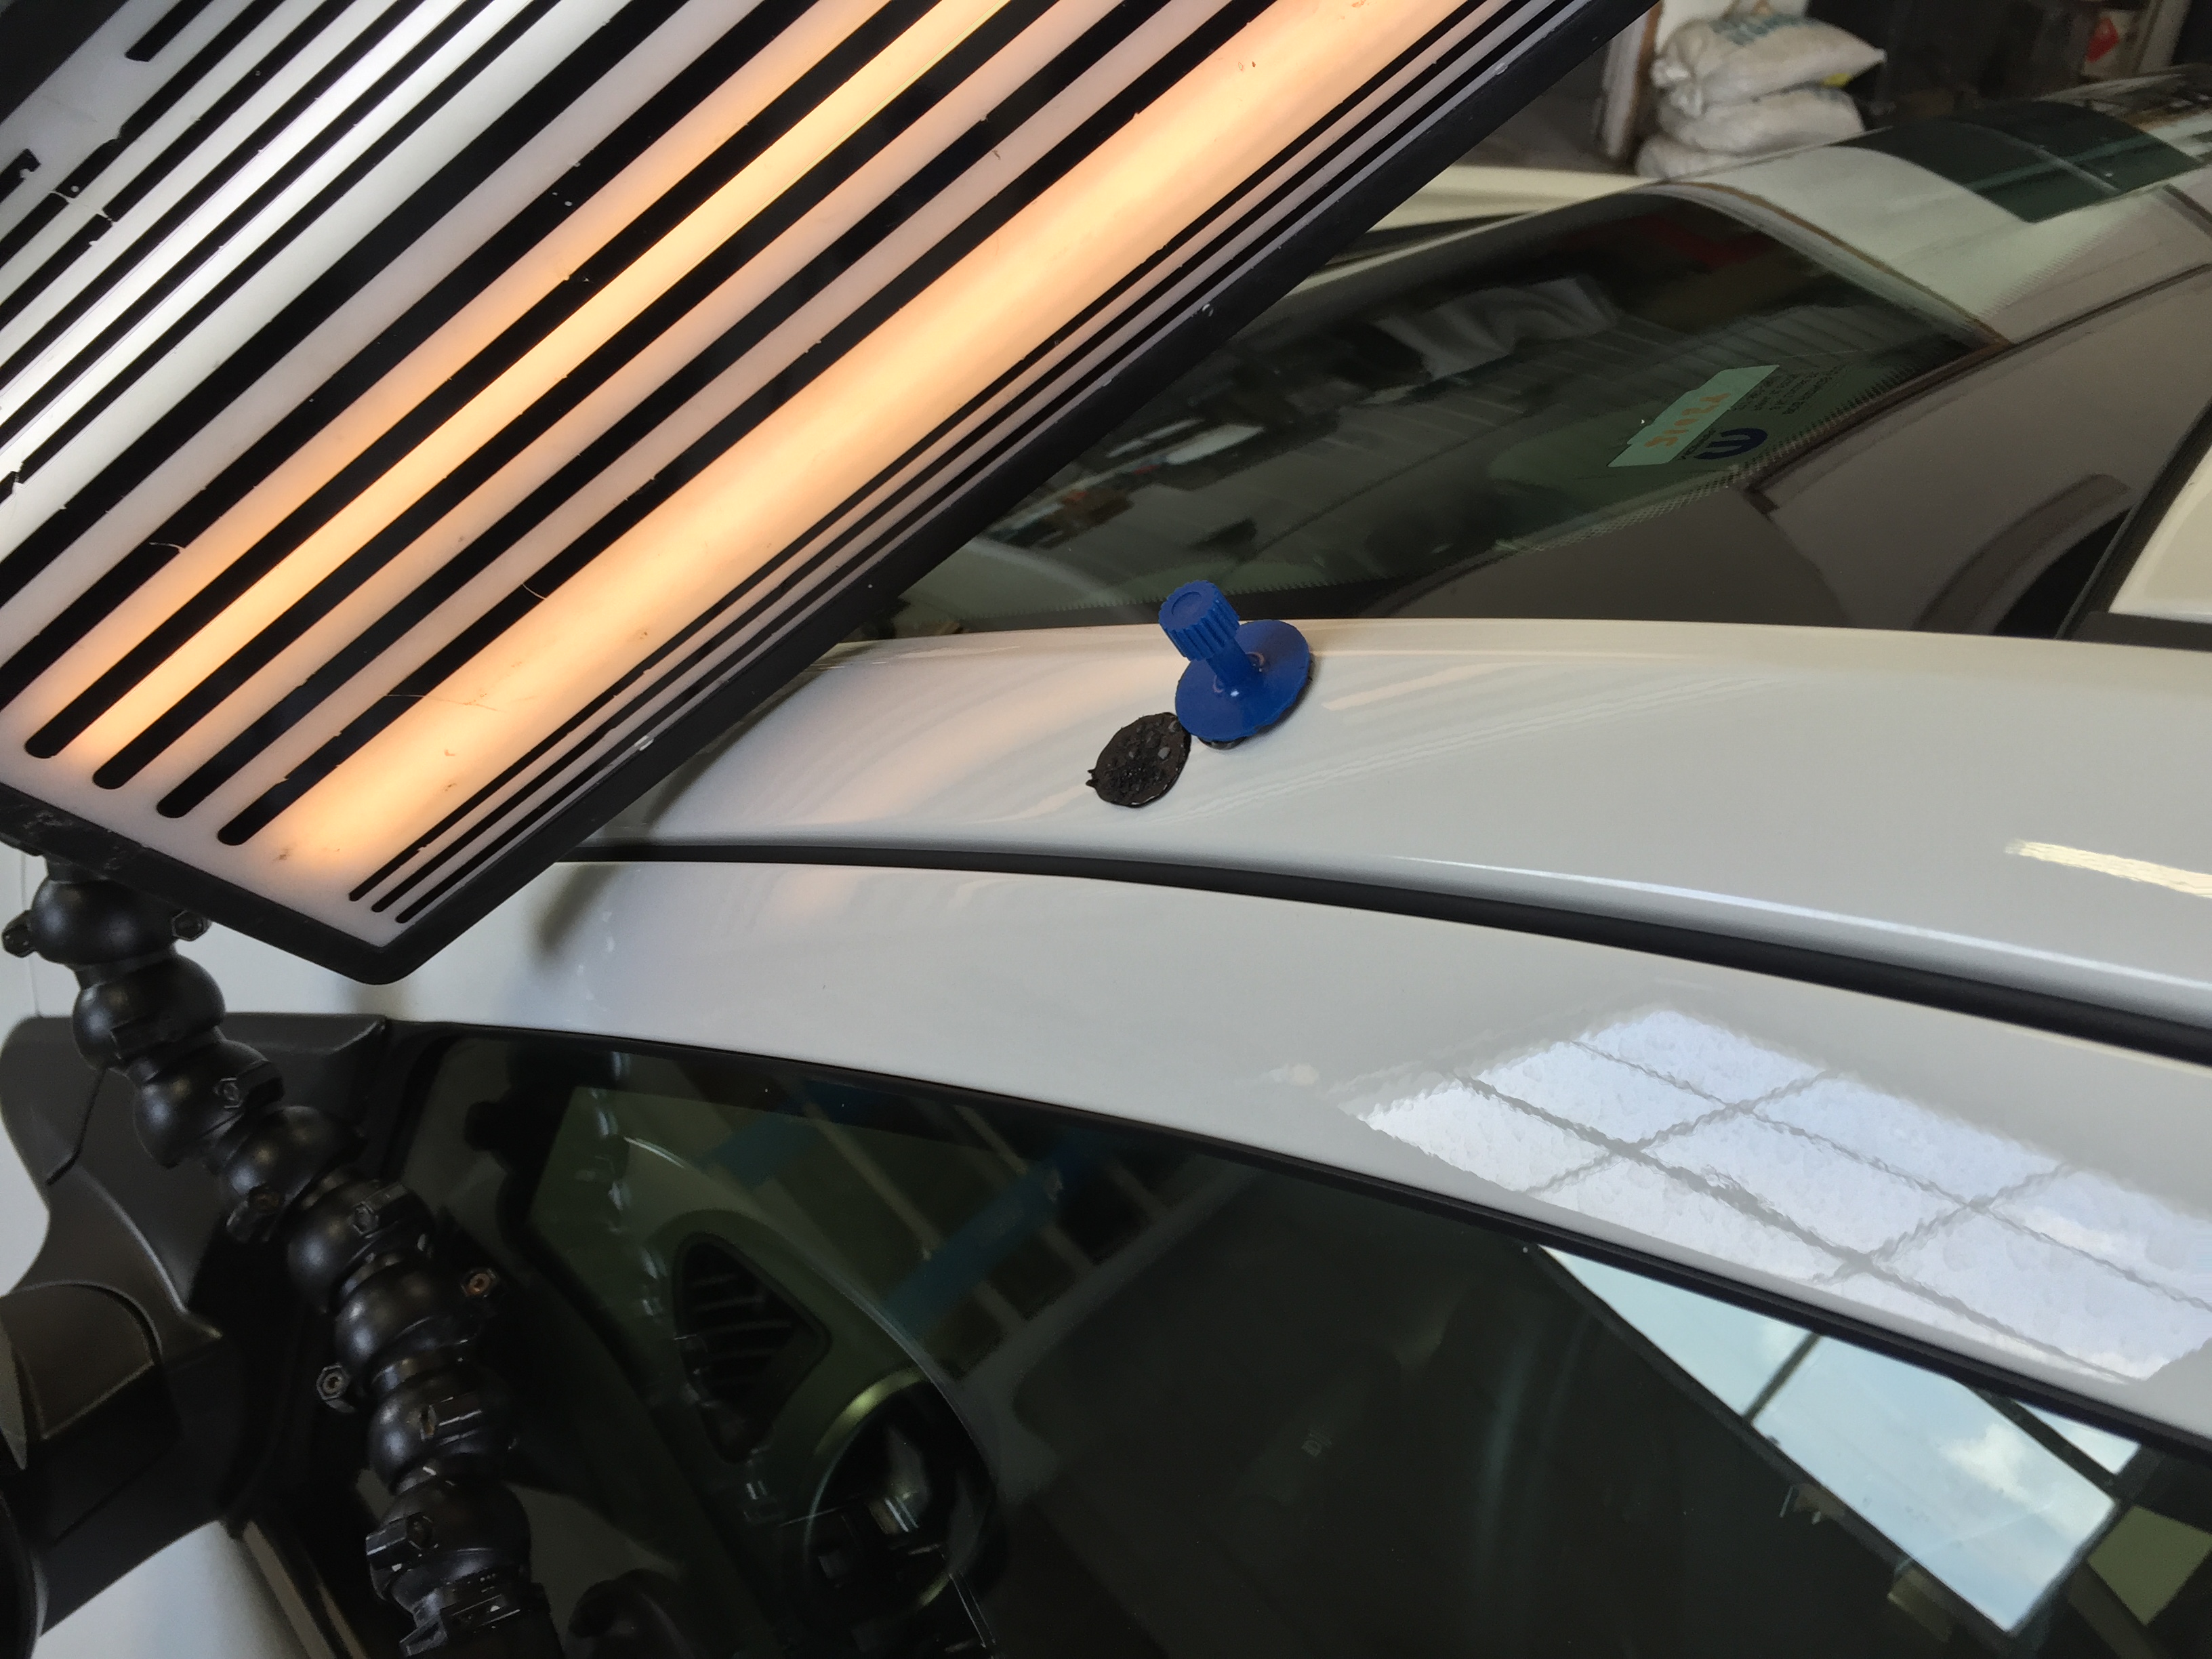 2015 Chevy Sonic, Dent Removal on PIllar, Images, Hail Damage, Paintless Dent Removal, Springfield, IL, http://217dent.com